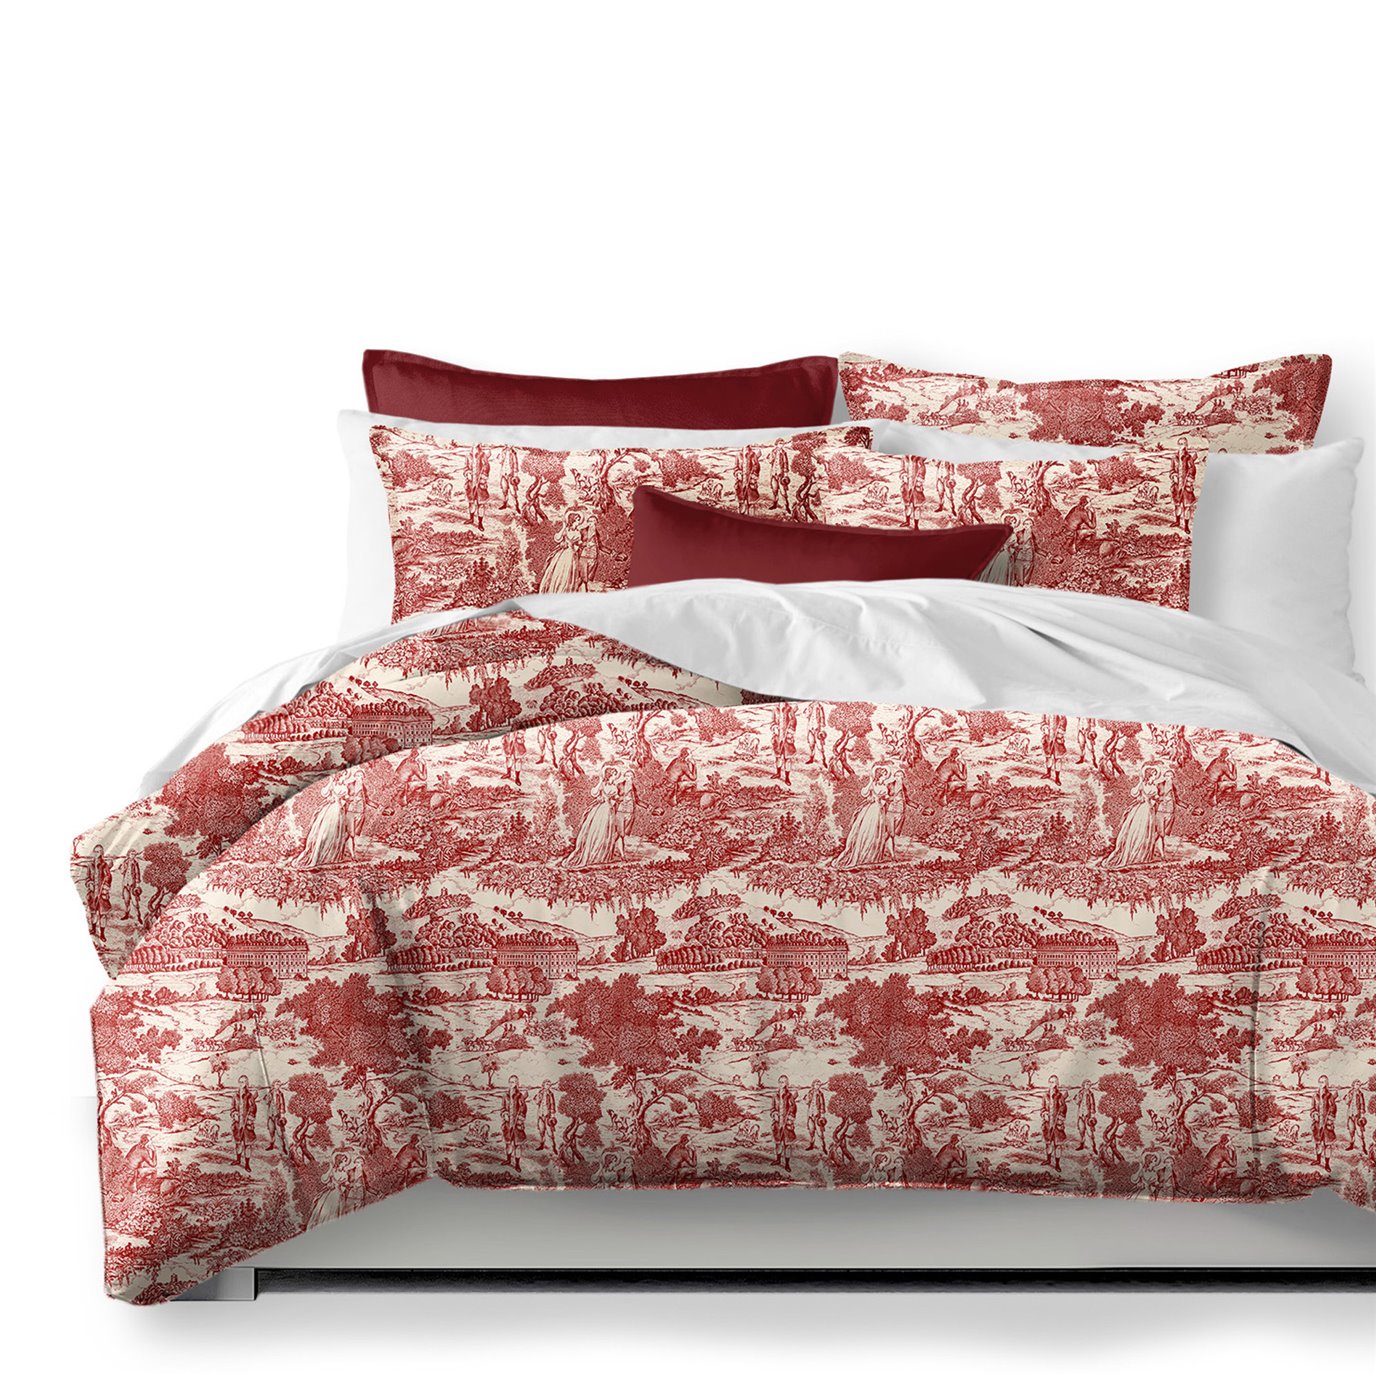 Beau Toile Red Comforter and Pillow Sham(s) Set - Size Super King